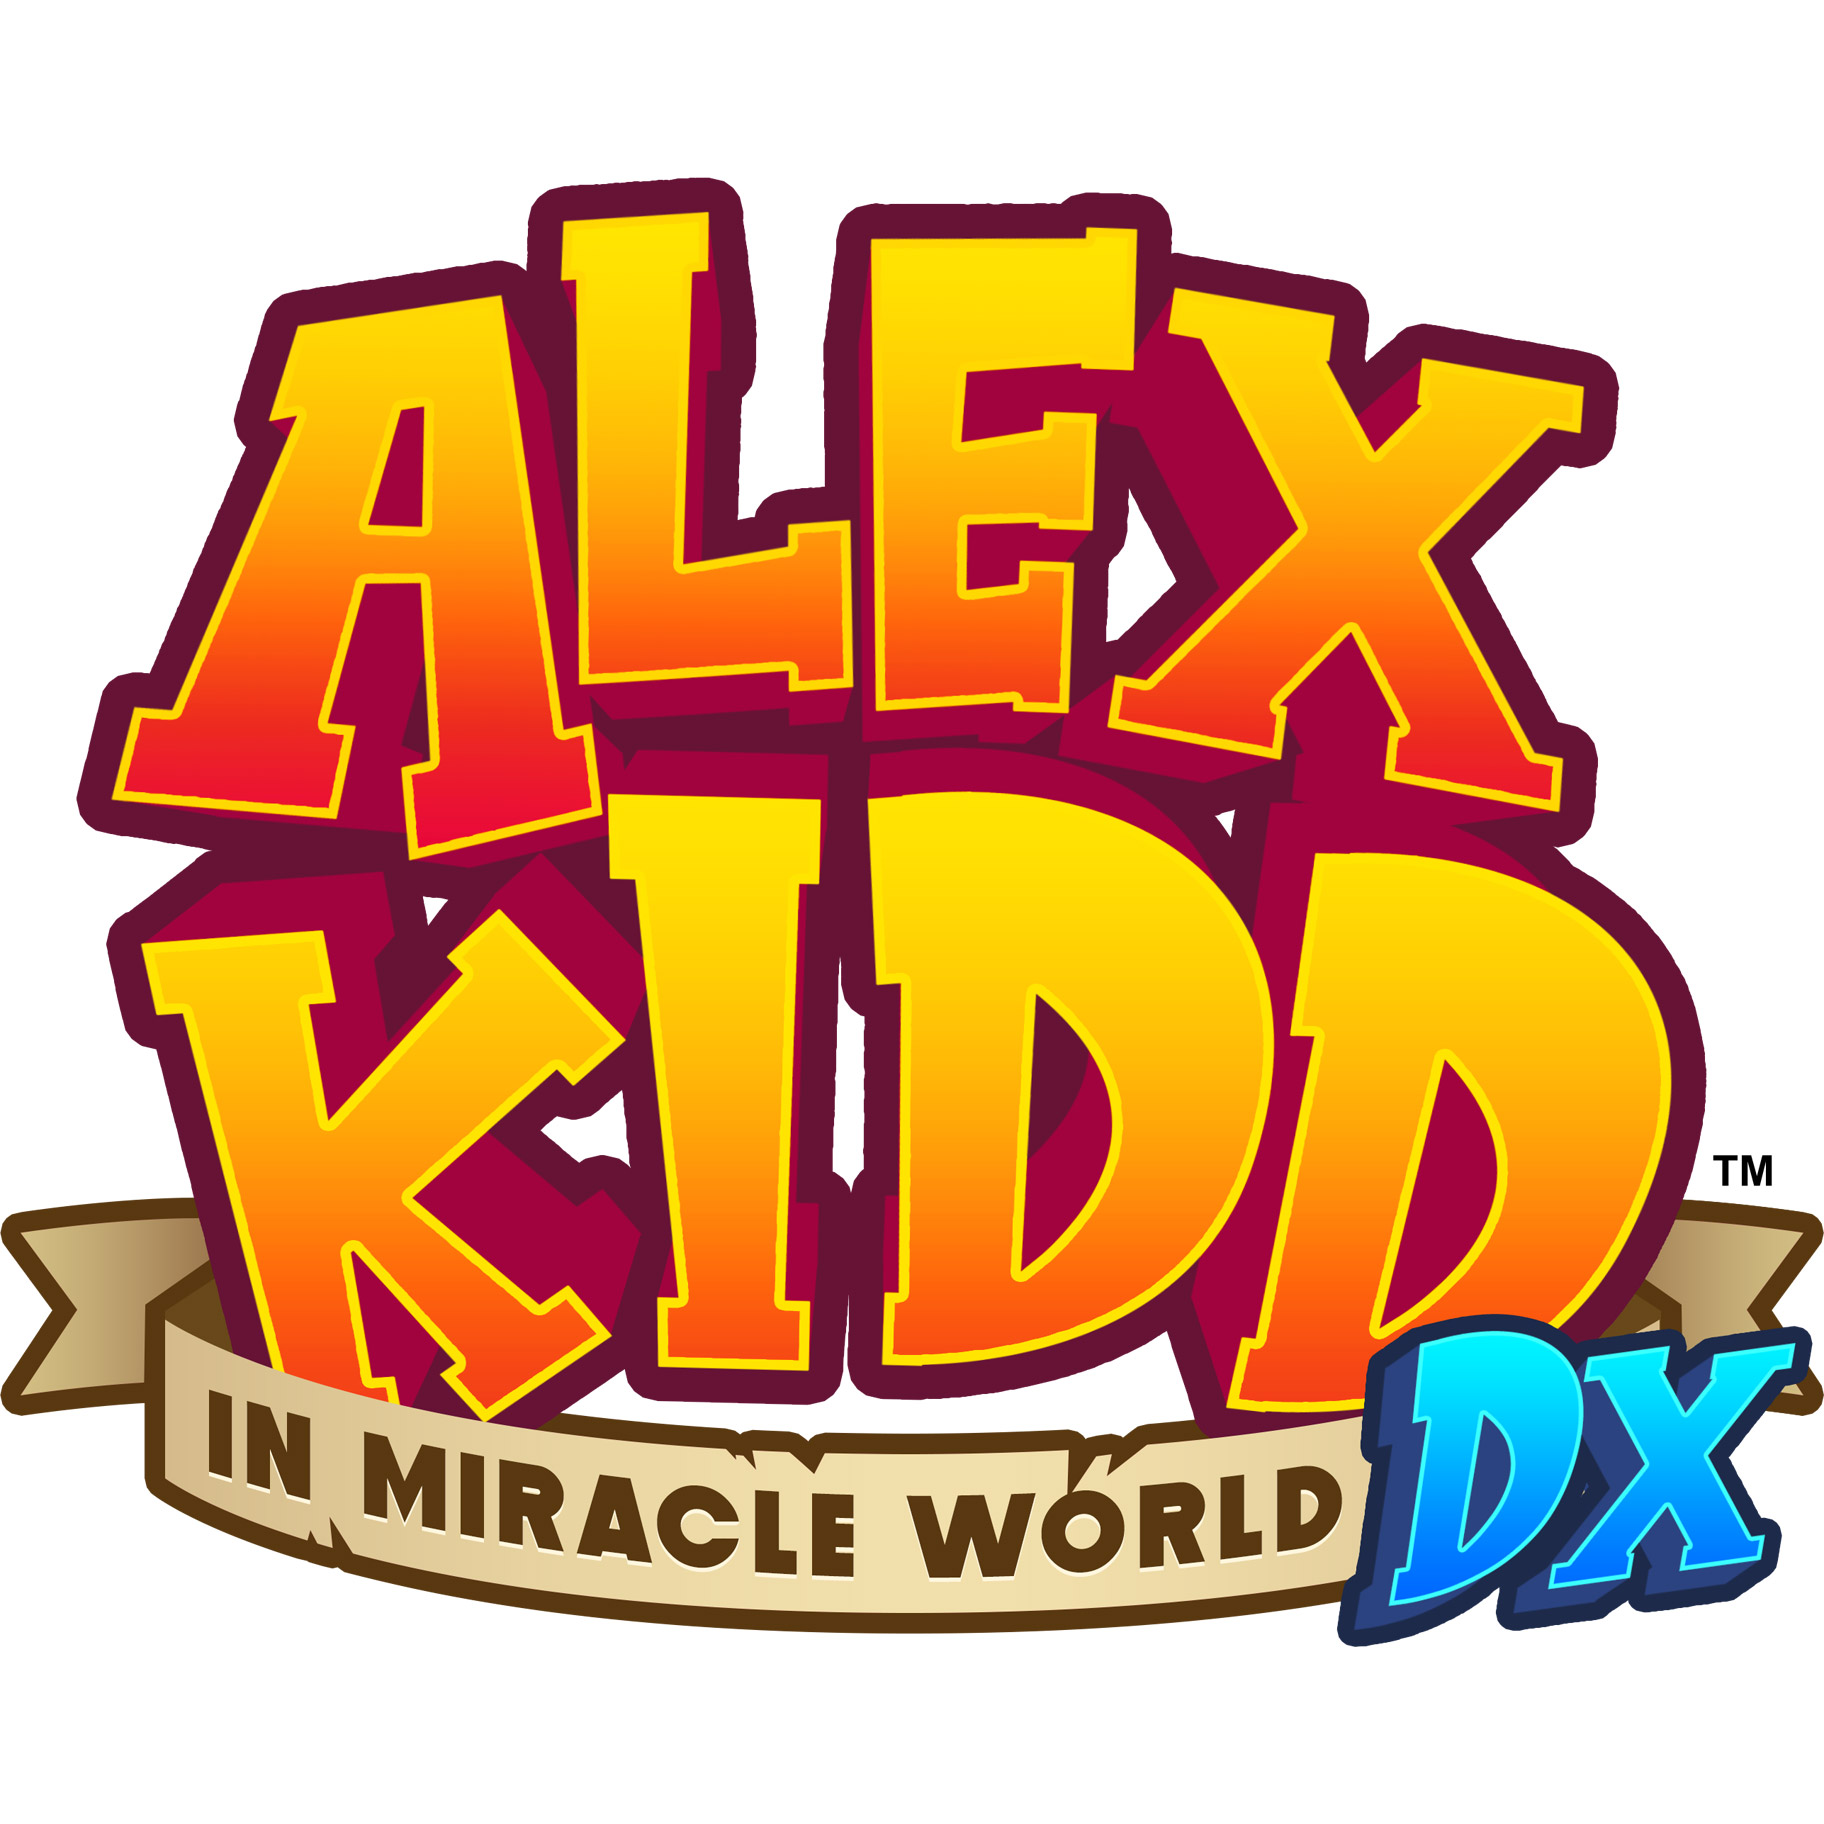 Alex Kidd in Miracle World DX 【PS4ゲームソフト】_1